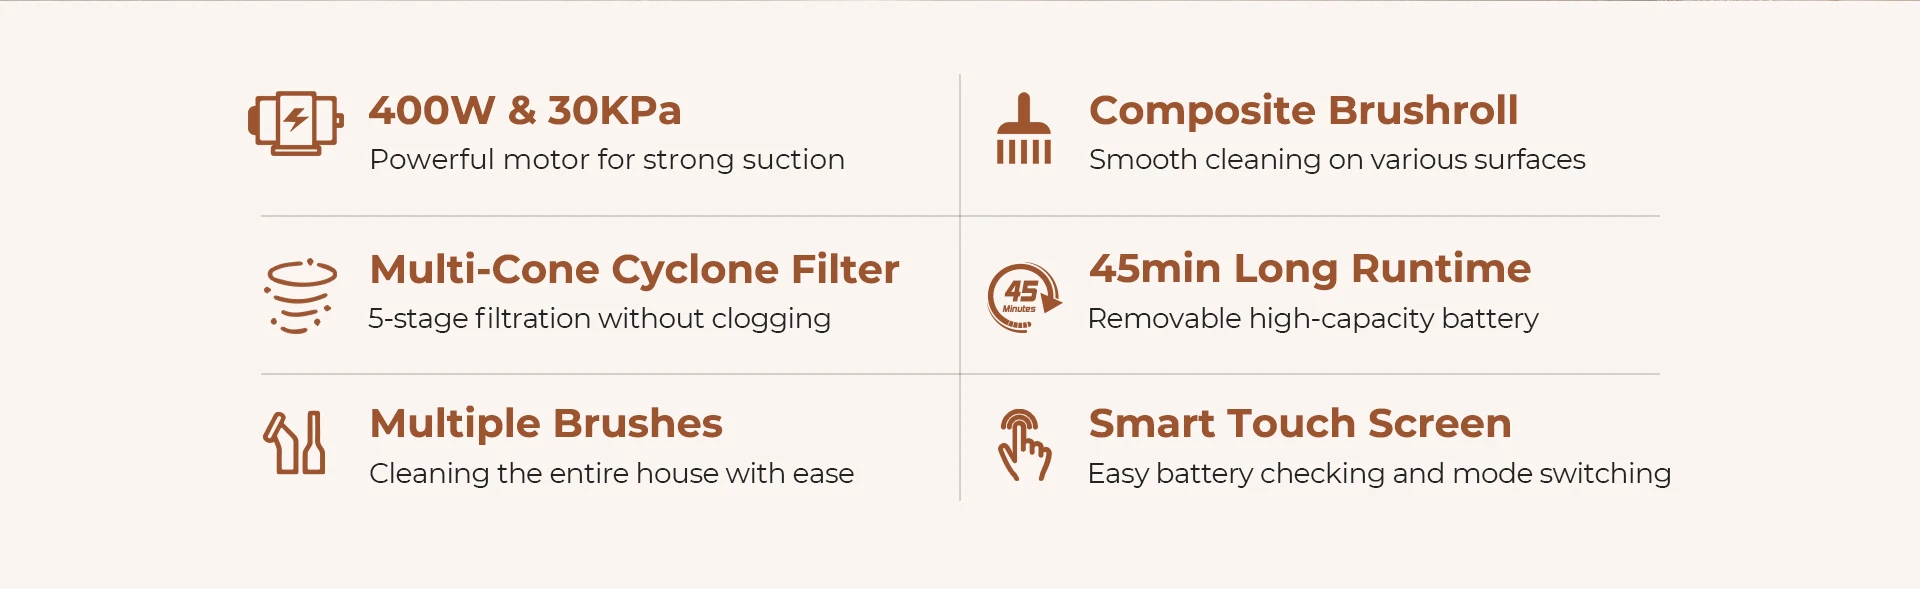 JIGOO C300 Cordless Vacuum Cleaner, 30KPa Suction, 400W Motor, 1.2L Dust Bowl, 5-Stage Filtration, Up to 45 Minutes Run Time, 2000mAh Removable Battery, LED Touch Screen, Rotating Metal Tube